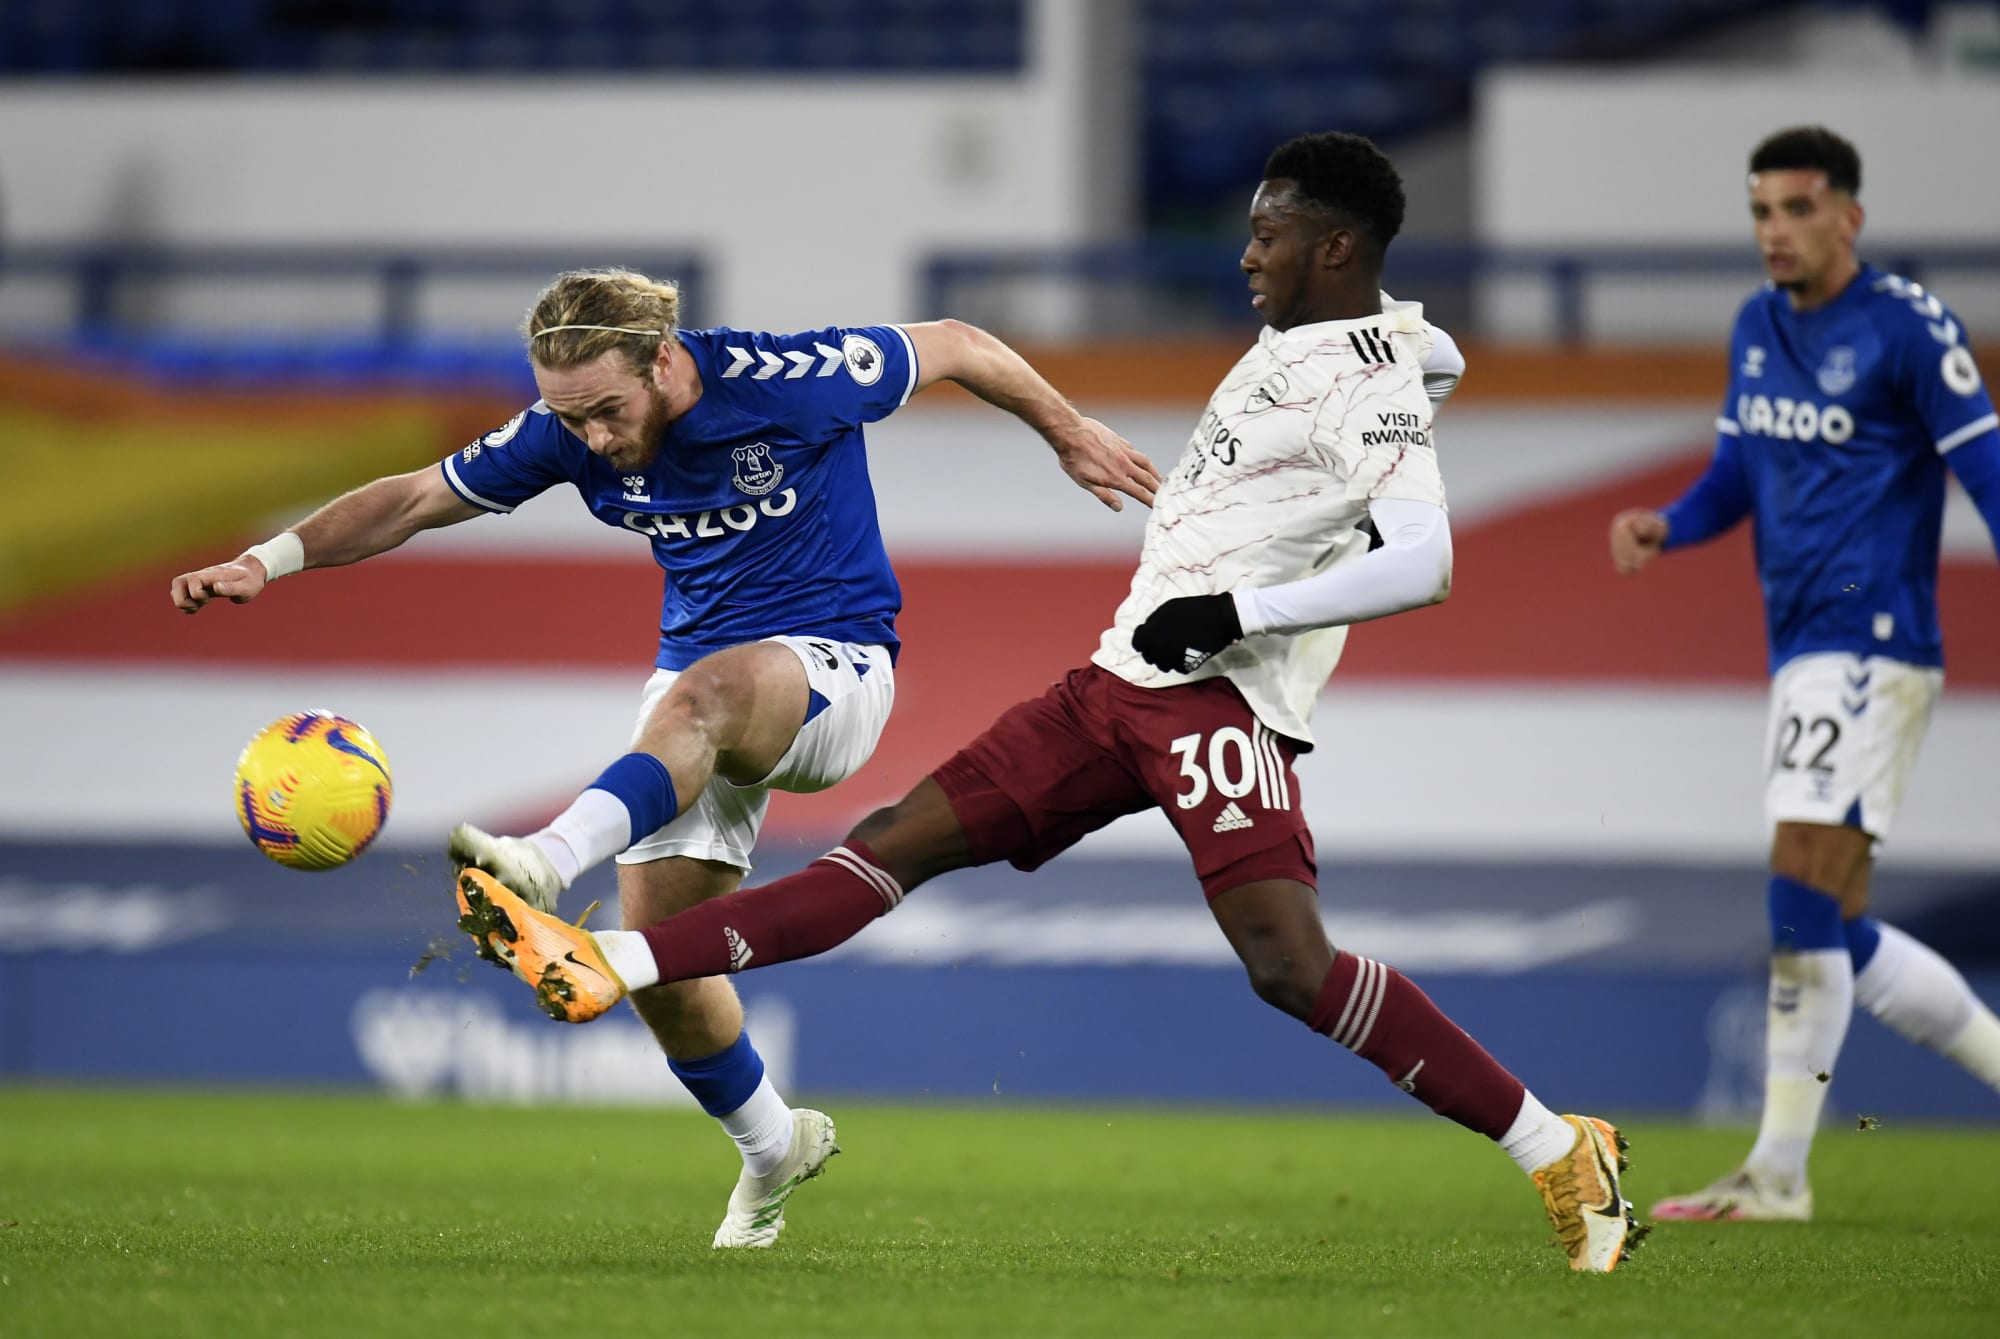 Tom Davies has perhaps his last chance at Everton with Allan injury